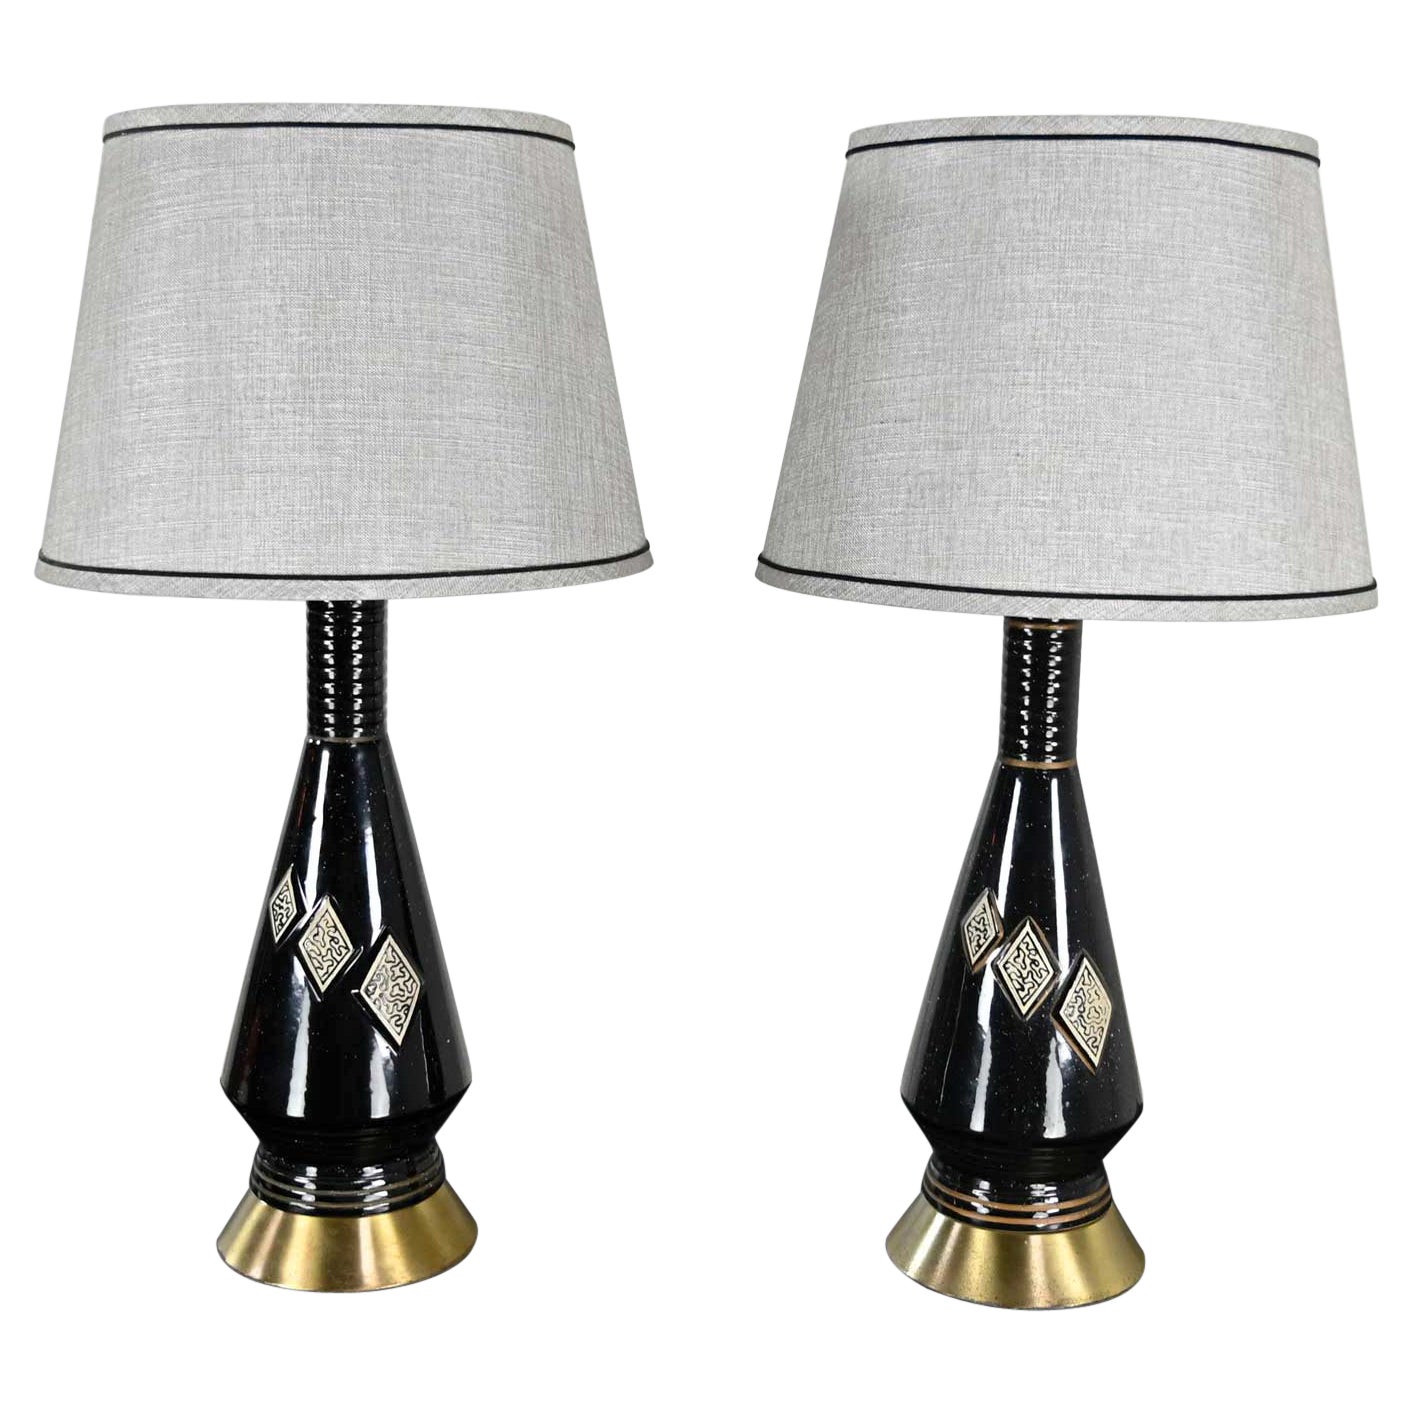 Mid-Century Modern Black Ceramic Lamps with Harlequin Style Diamond Design For Sale